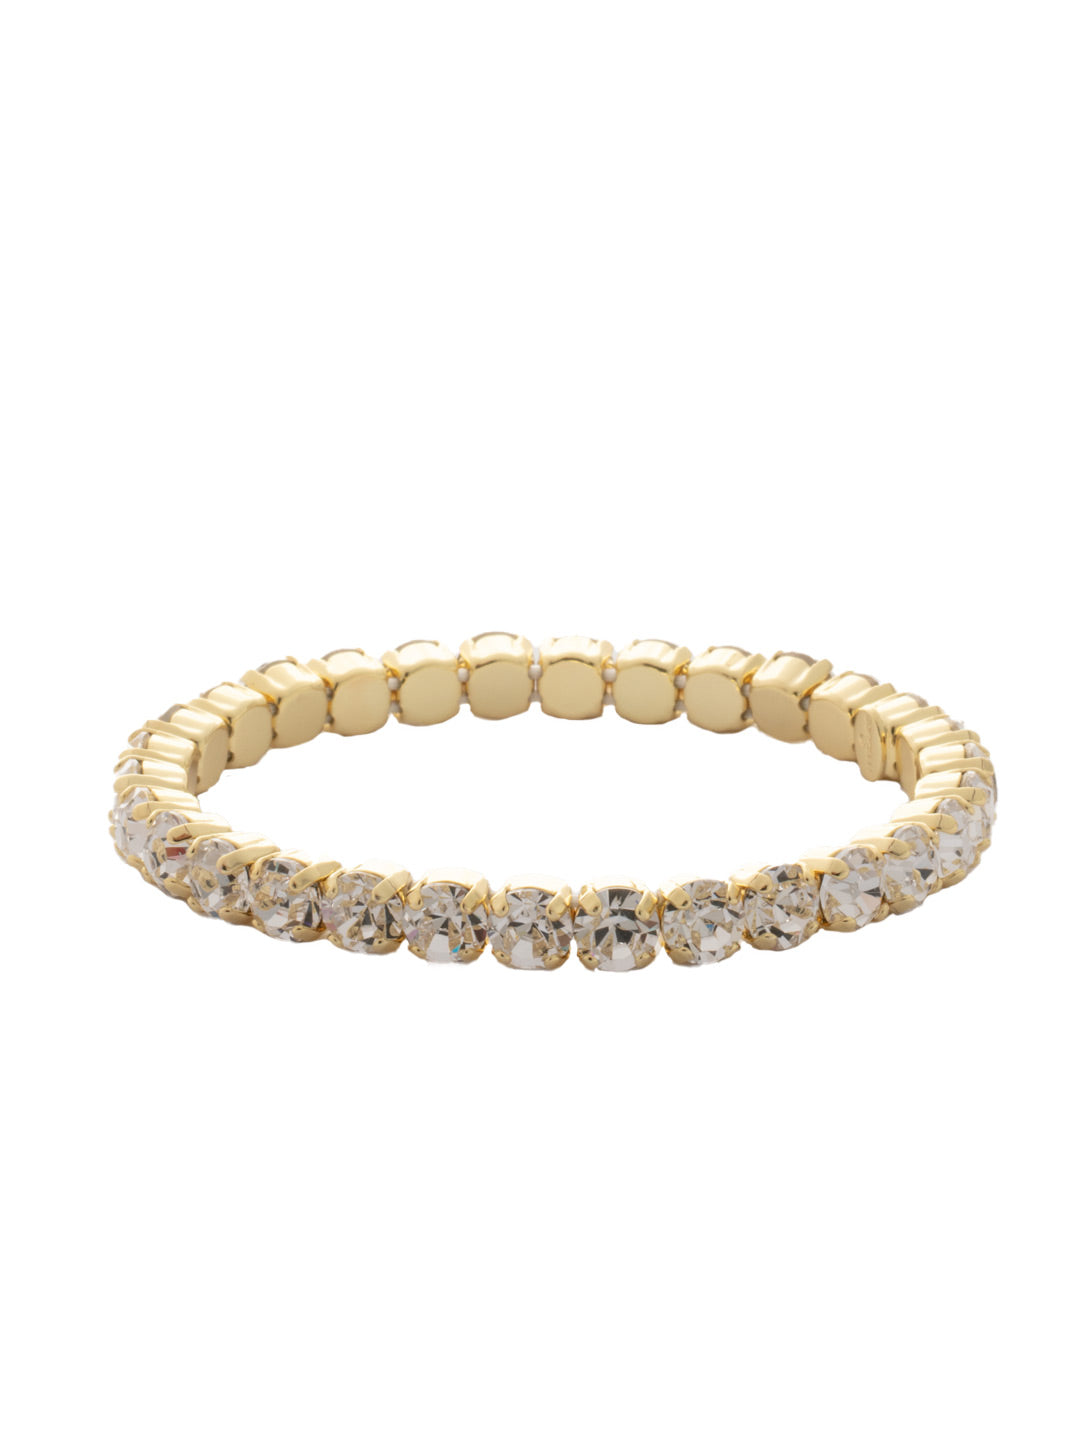 Mini Sienna Stretch Bracelet - BFD52BGCRY - <p>The Mini Sienna Stretch Bracelet is a mini take on a bestselling style! The Mini Sienna Stretch Bracelet features a line of small round crystals on a sturdy jewelers' filament, stretching to fit most wrists comfortably, without the hassle of a clasp! From Sorrelli's Crystal collection in our Bright Gold-tone finish.</p>